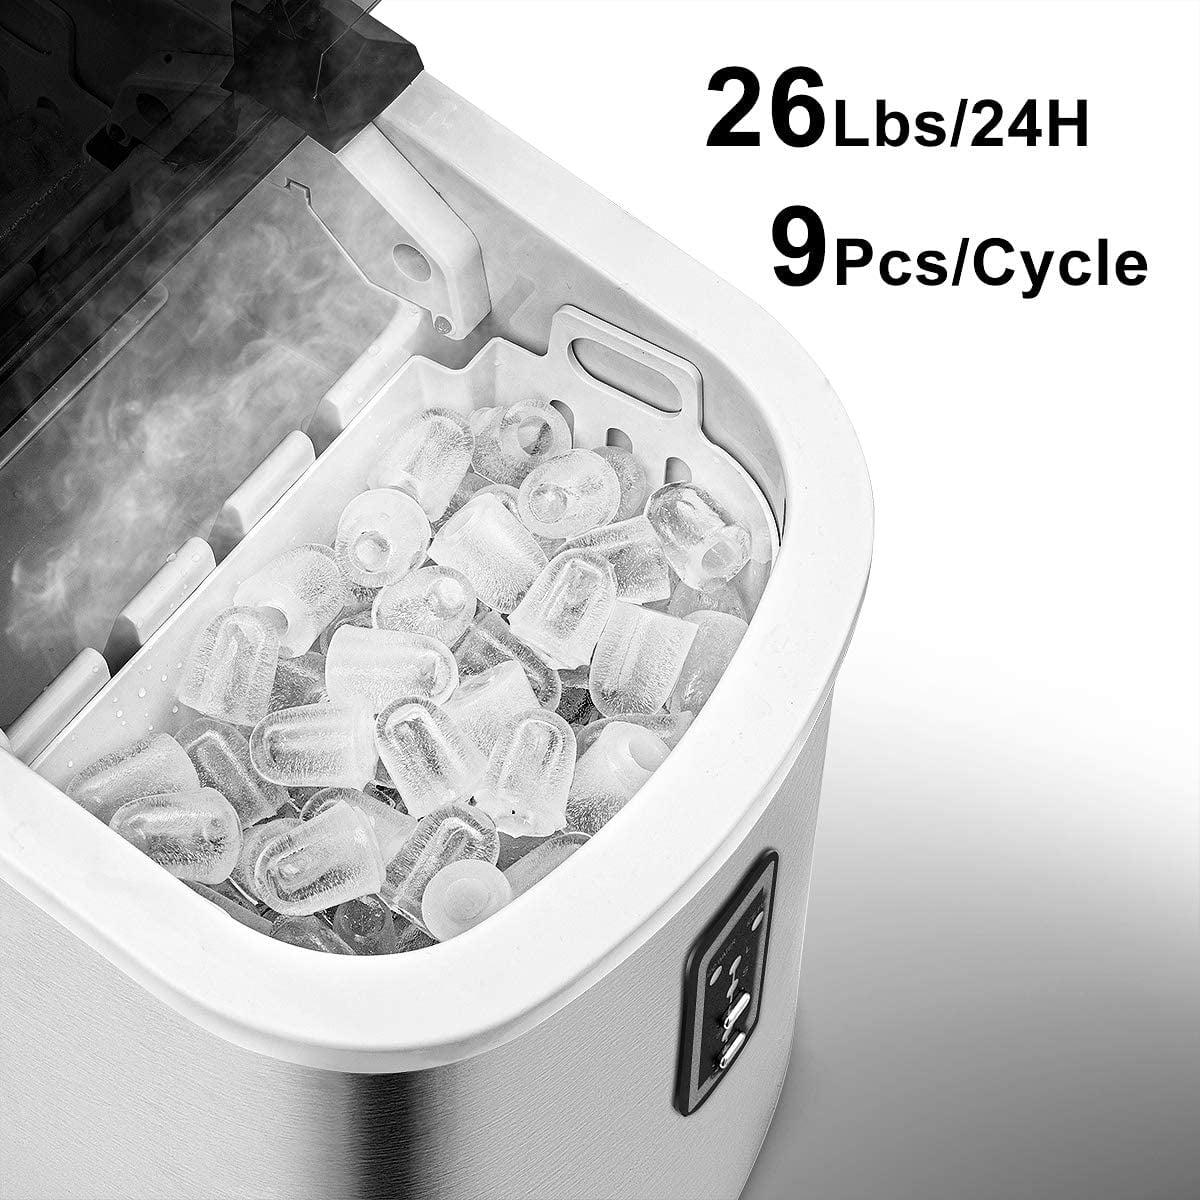 Ice Cubes Ready in 6 Mins Compact Electric Ice Maker with Ice Scoop and Basket S/L SILVER Ice Maker Machine Countertop Make 26 lbs Ice in 24 Hrs with 2 Size 